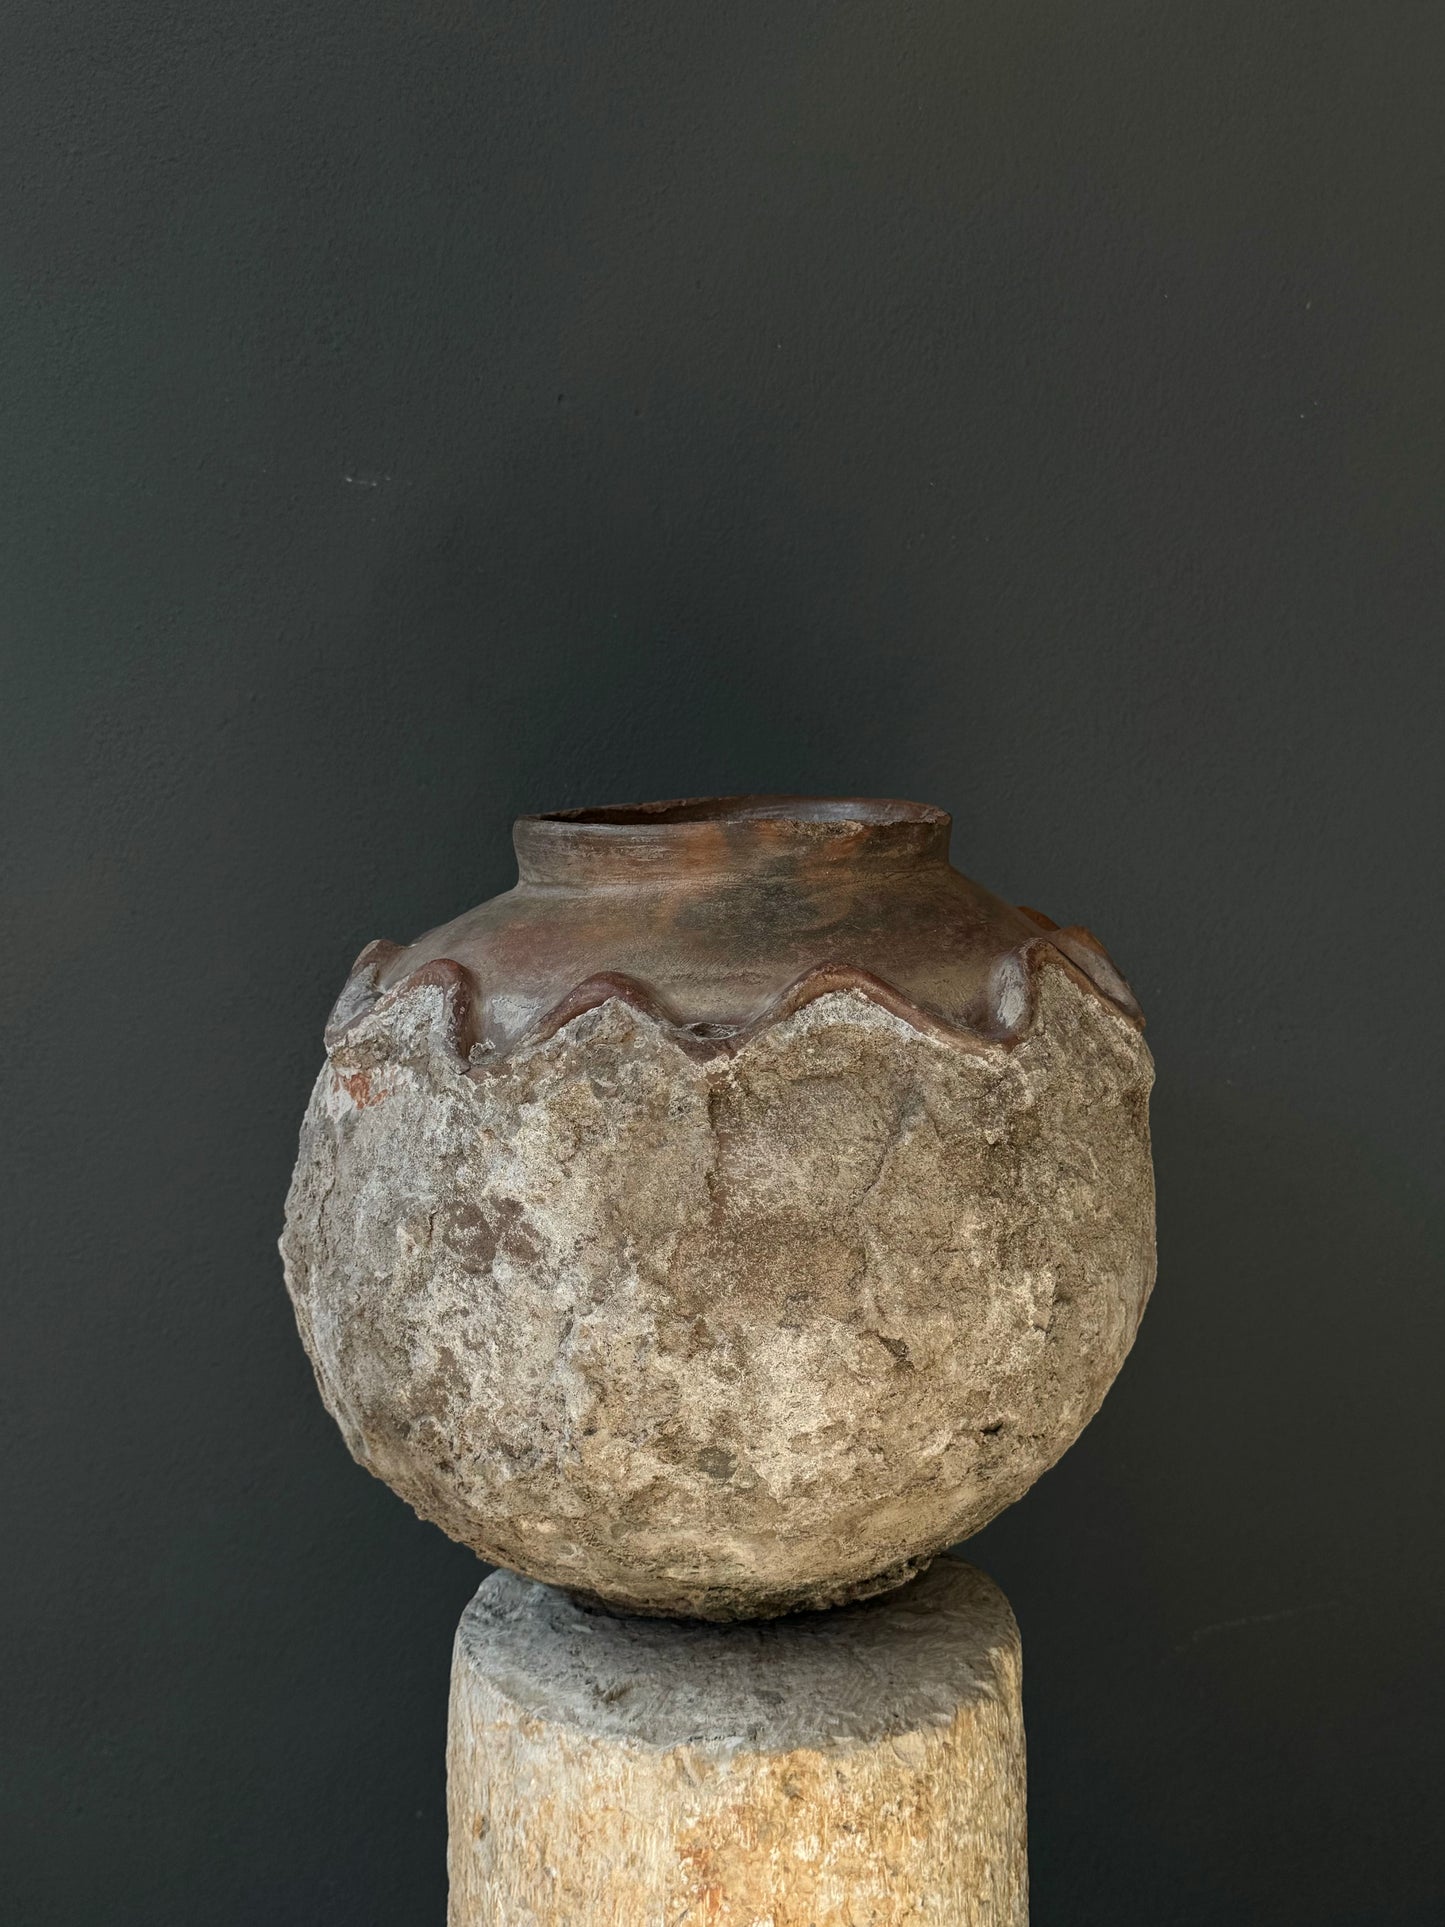 Ceramic Water Vessel From Michoacán, Early 20th Century